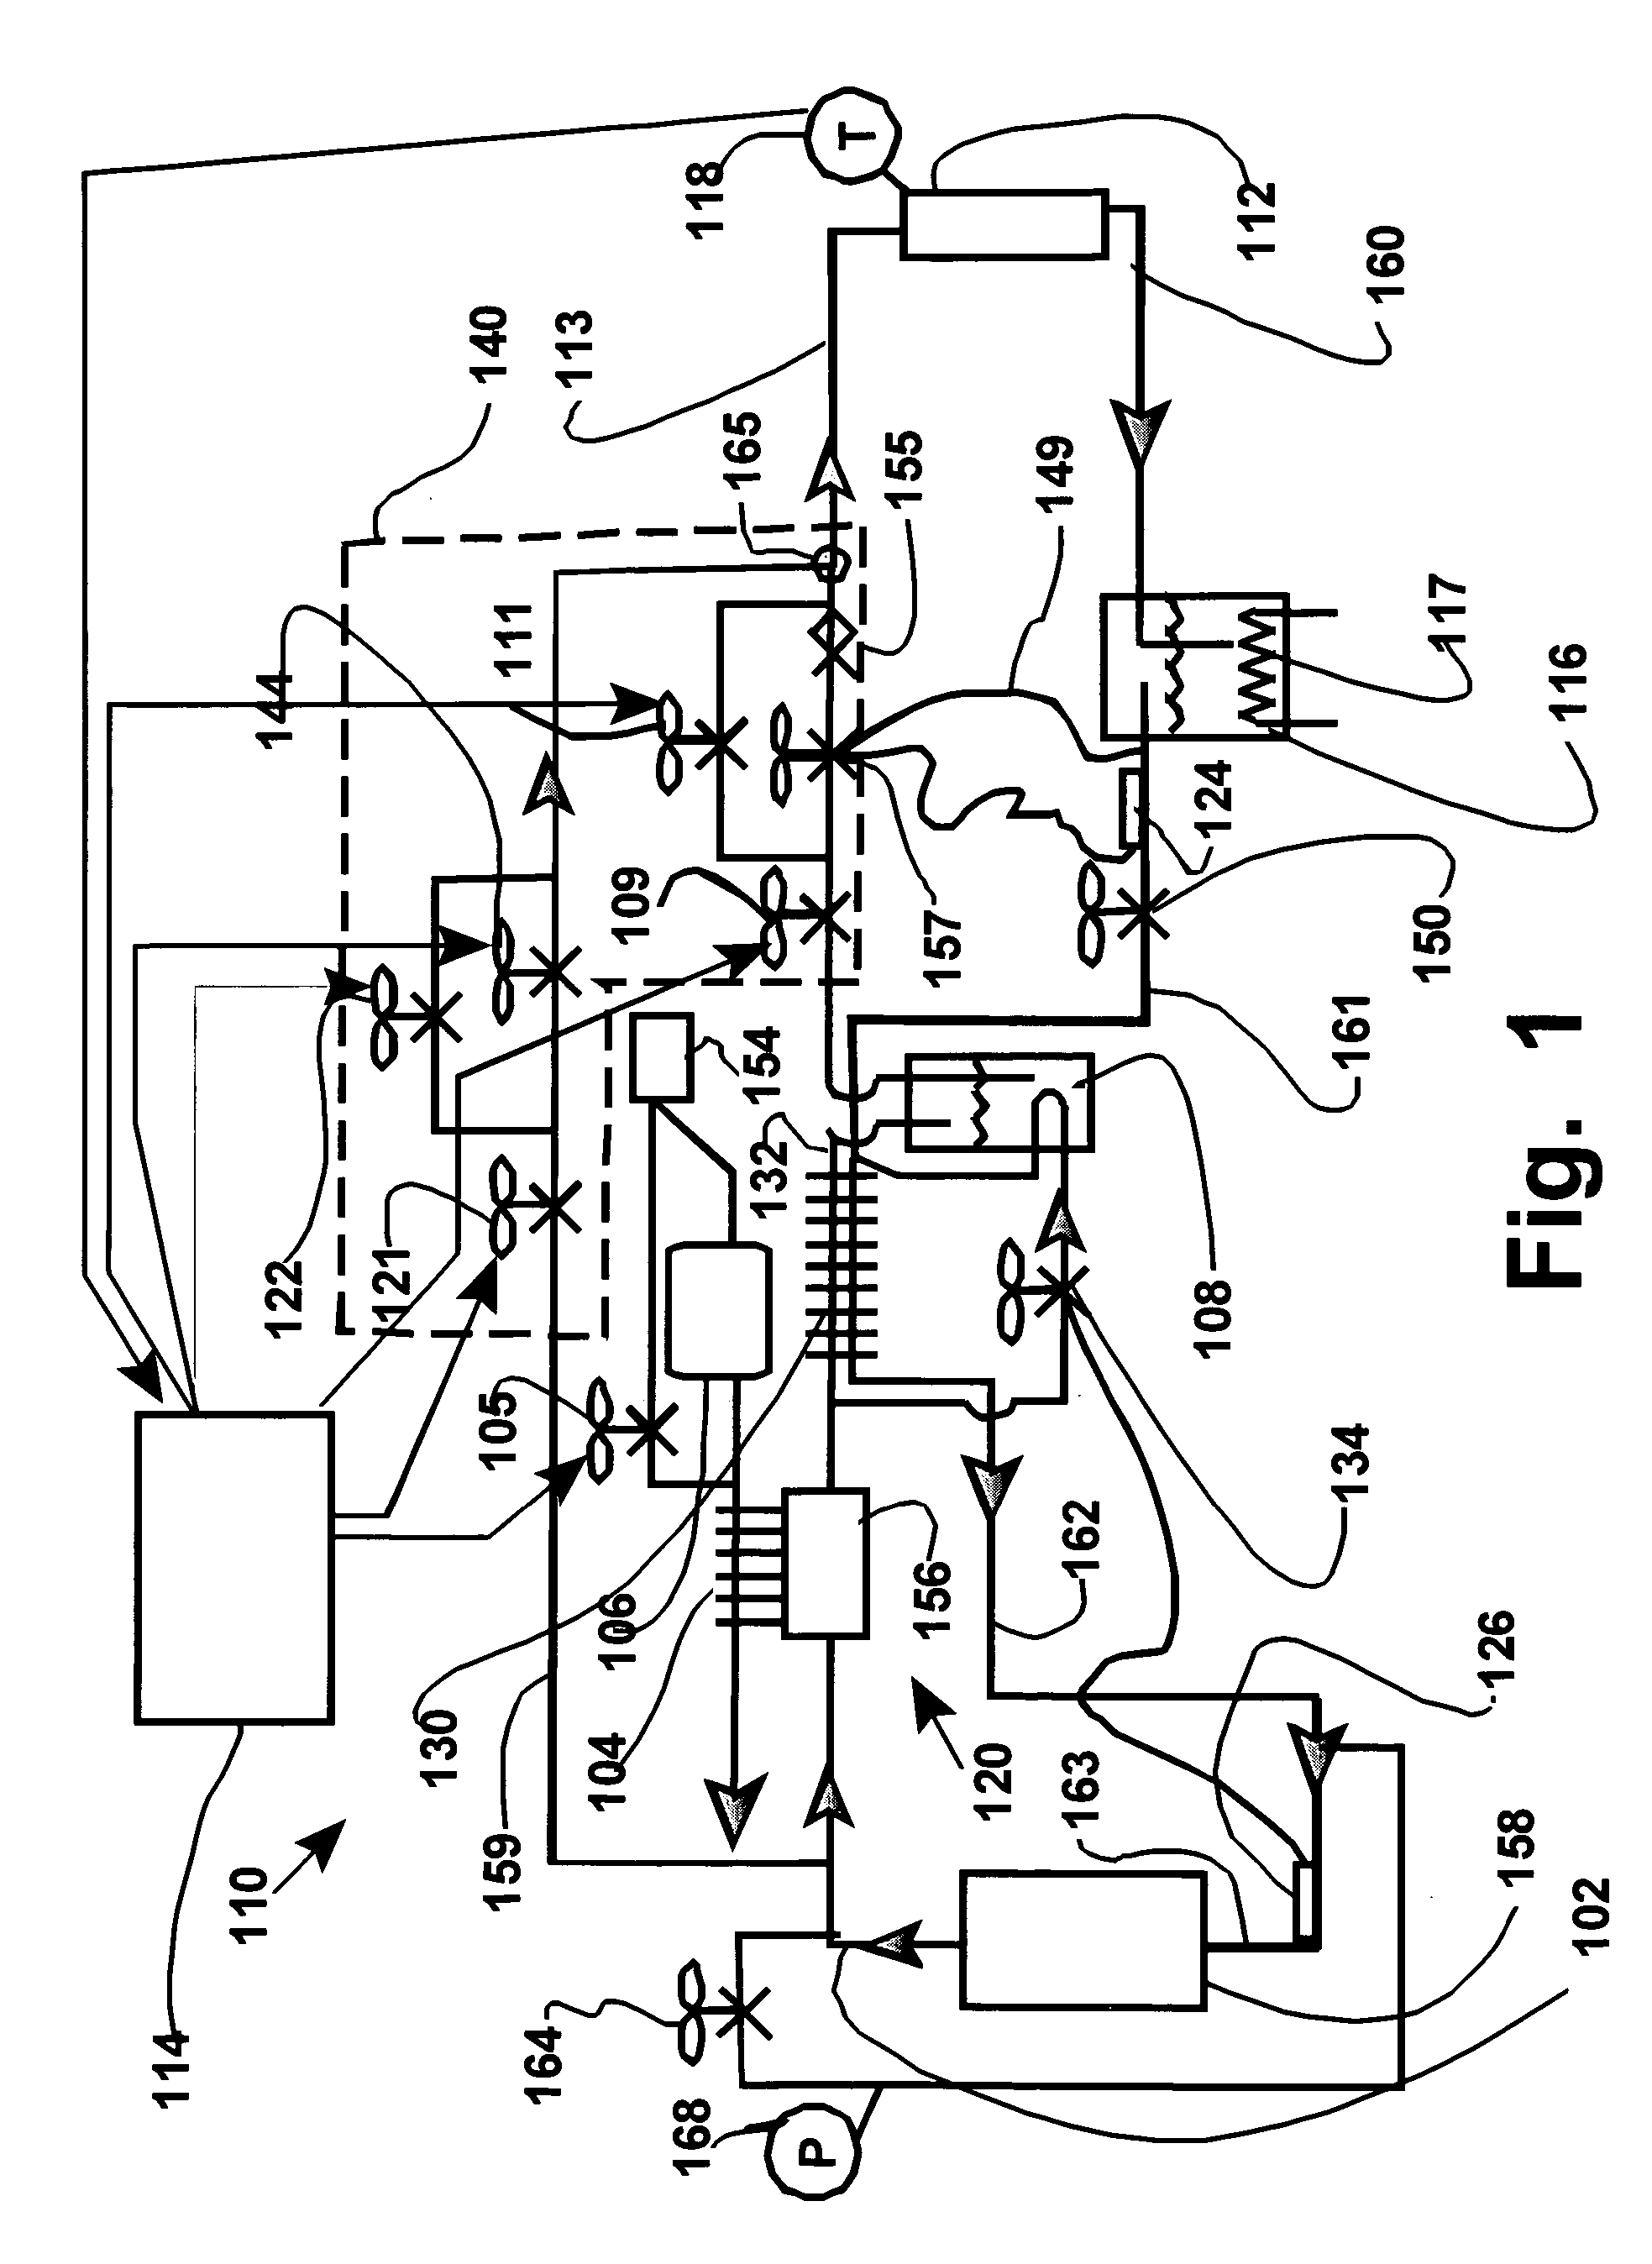 Thermal control system and method